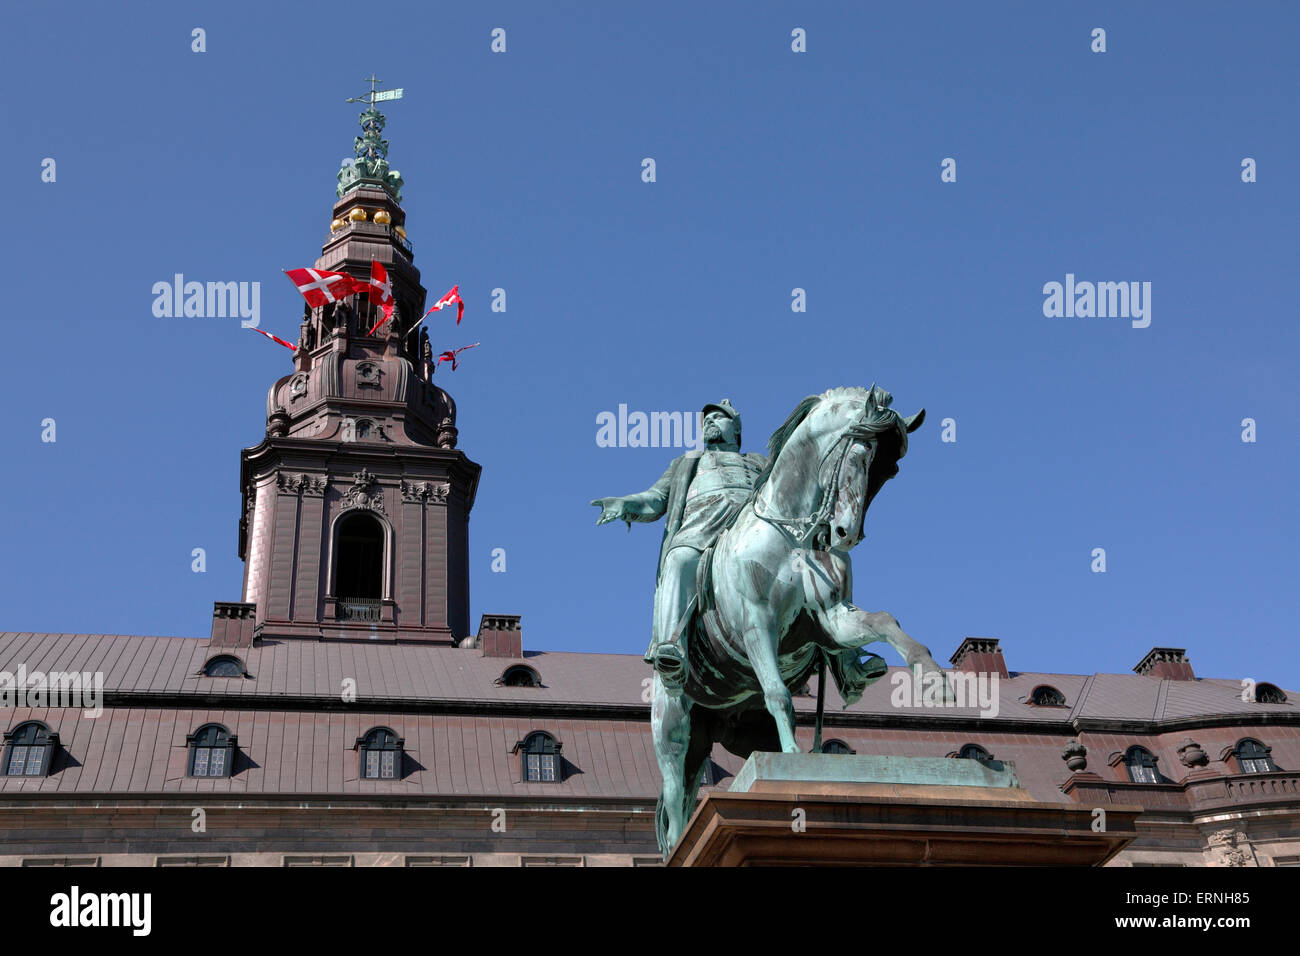 Copenhagen, Denmark, 5th June, 2015. The amendment of the Danish Constitution in 1915 gave Danish women the right to vote and stand for election. This important anniversary is celebrated in Copenhagen on the Constitution Day by the Government, the Parliament and the ongoing Distortion Festival in Copenhagen. The events are concentrated around the Christiansborg Palace. The equestrian statue of King Frederik 7th in front of Christiansborg presenting the Danish flags in the tower turrets. Credit:  Niels Quist/Alamy Live News Stock Photo